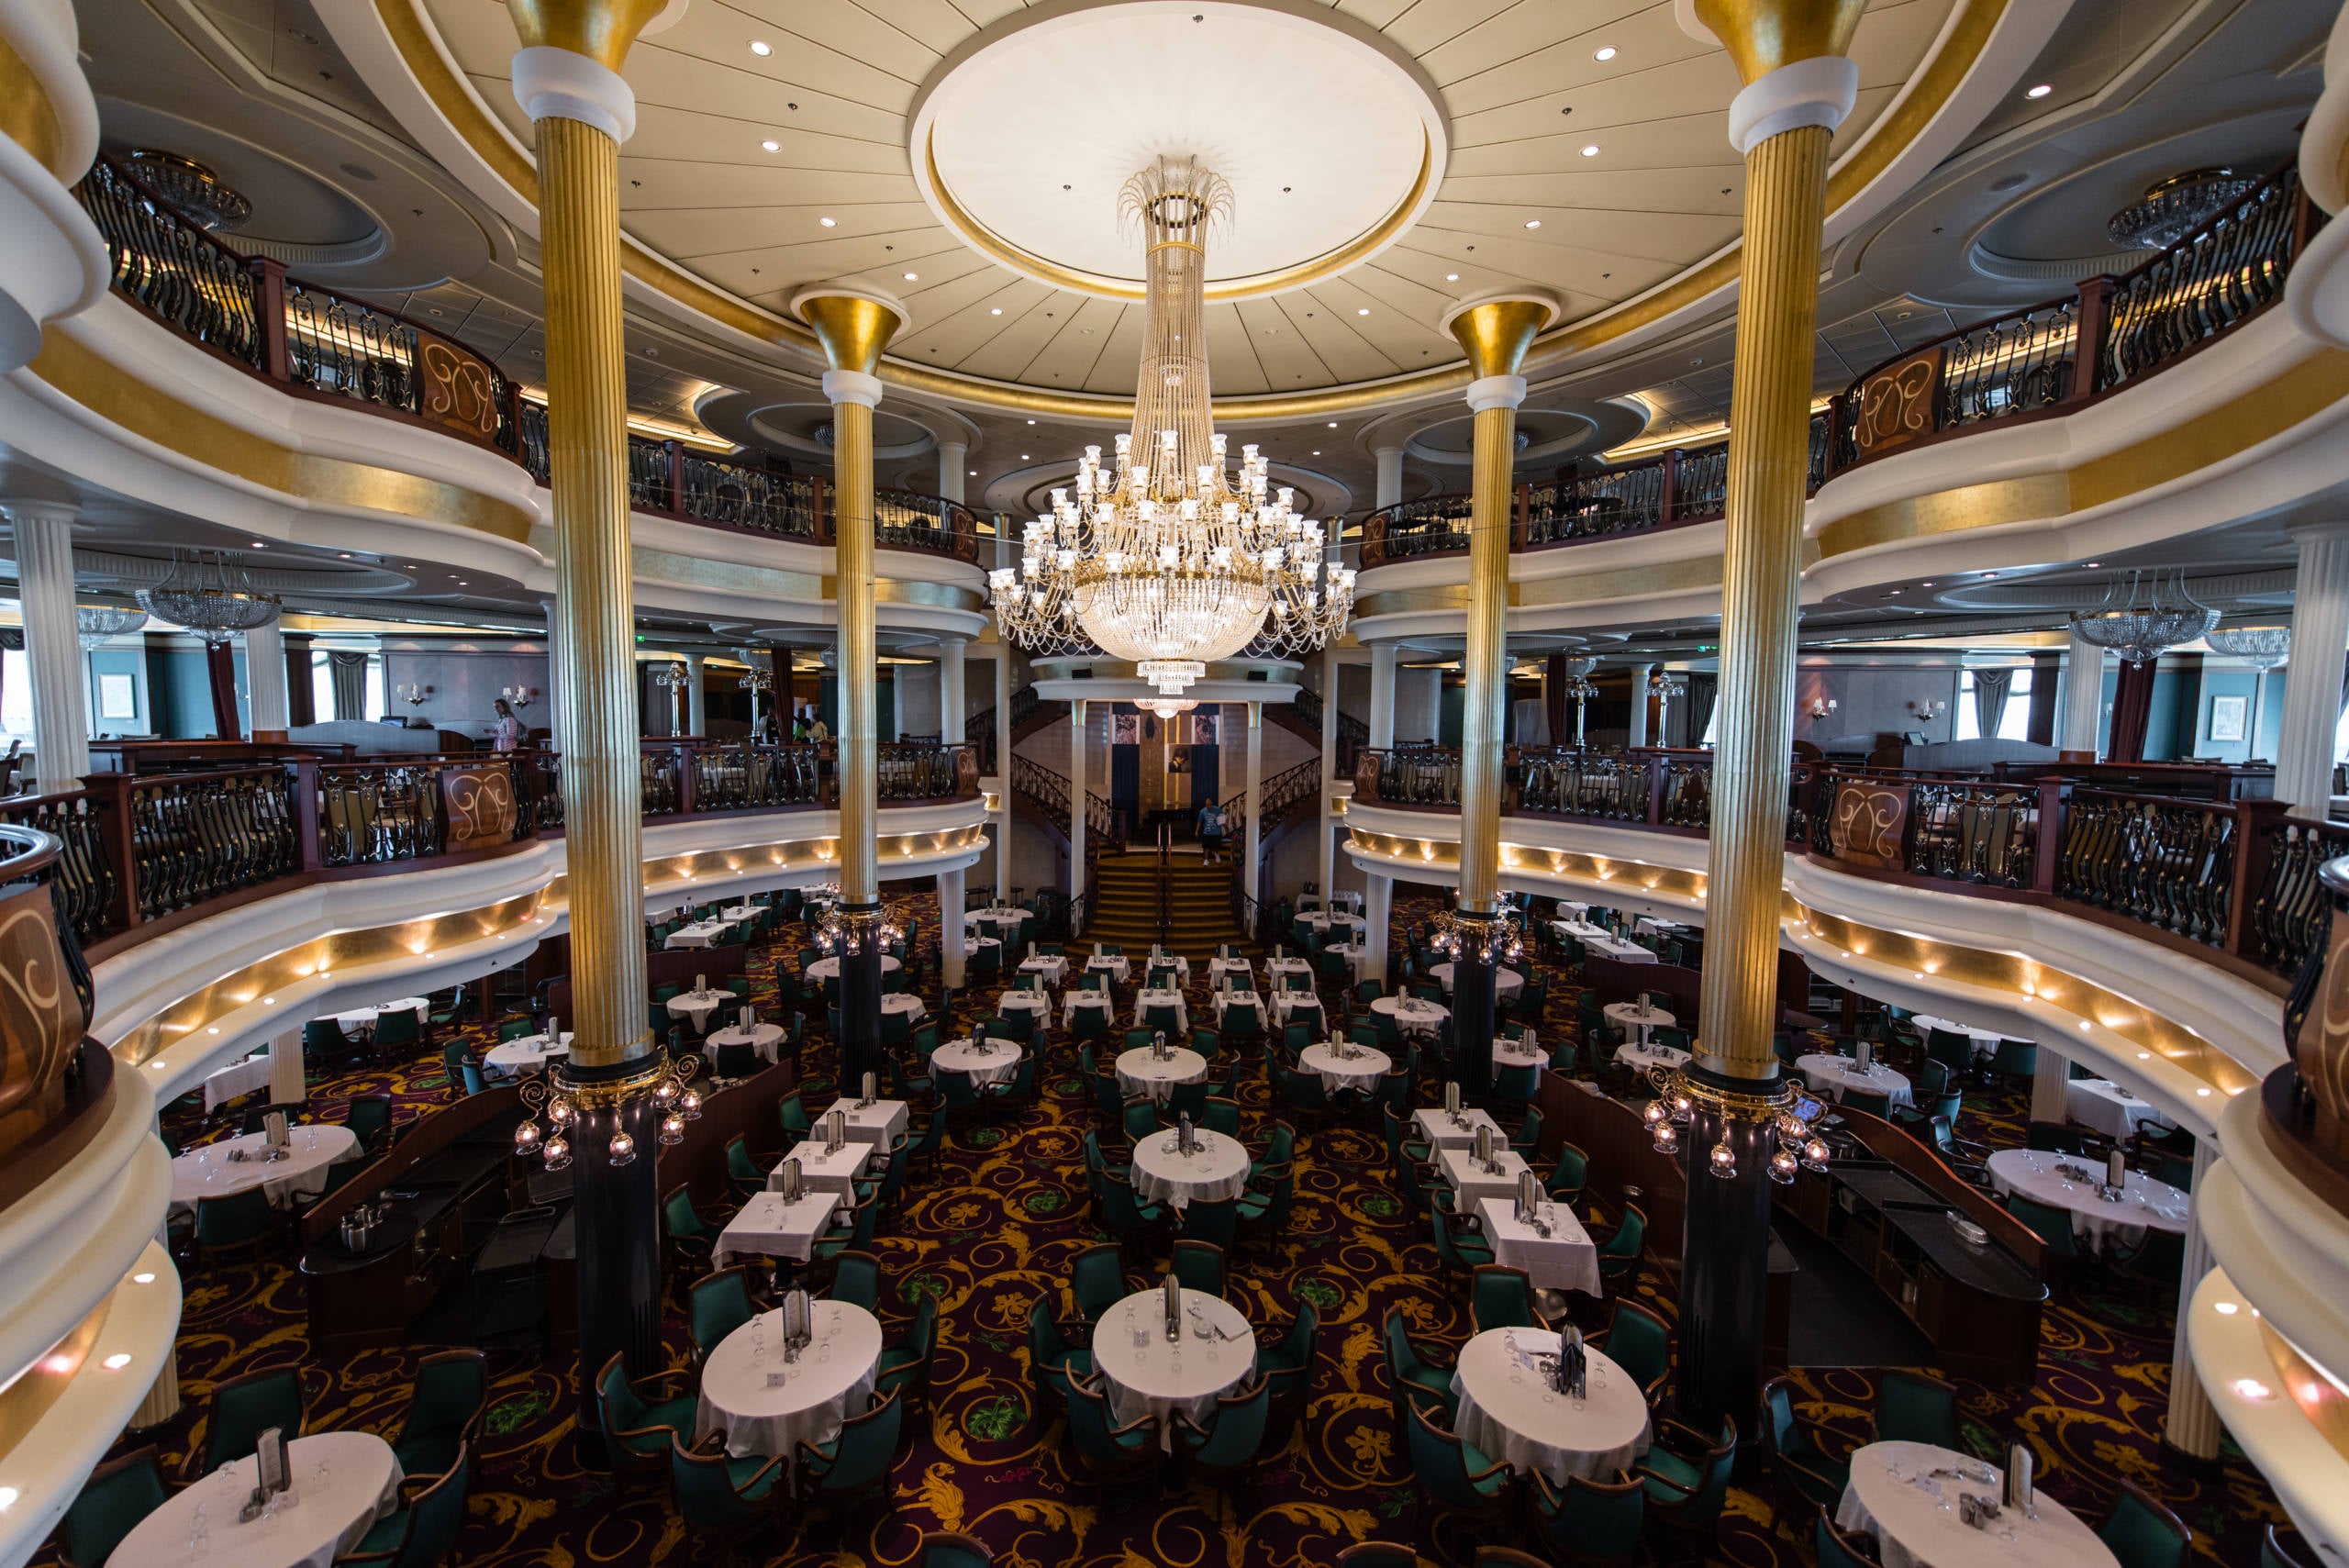 The ultimate guide to cruise ship food and dining - The Points Guy